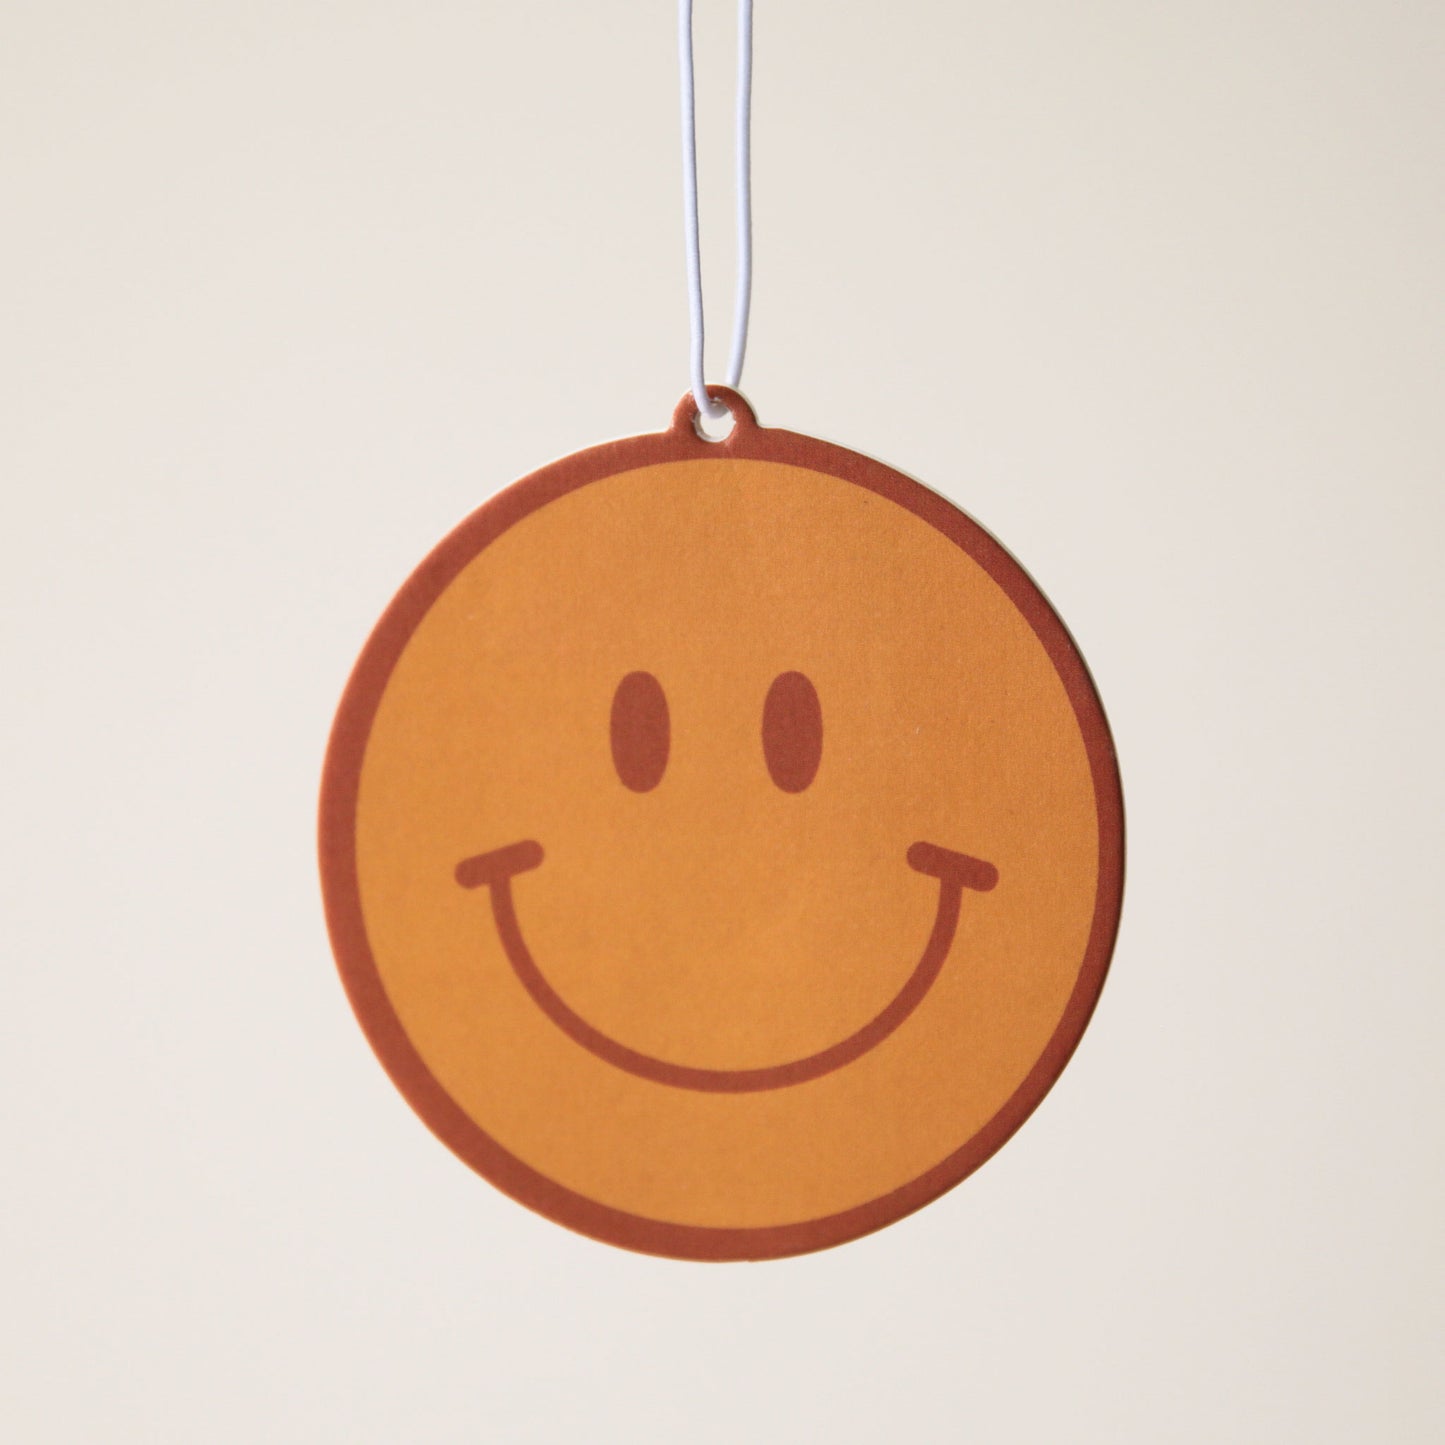 A burnt yellow car air freshener in the shape of a smiley face.